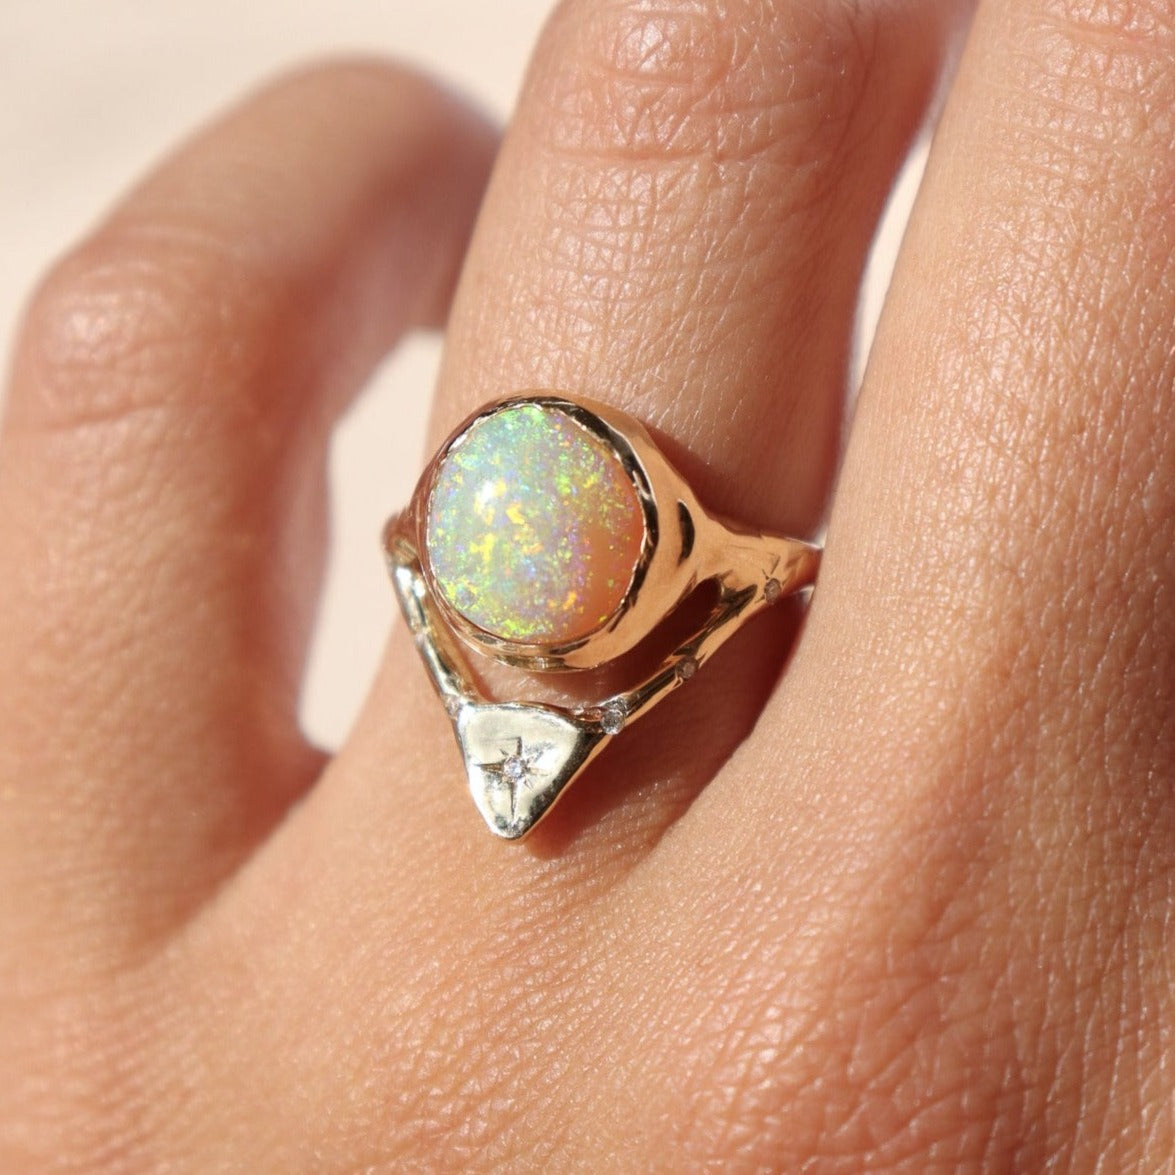 gold opal ring with diamonds is modeled on a ring finger